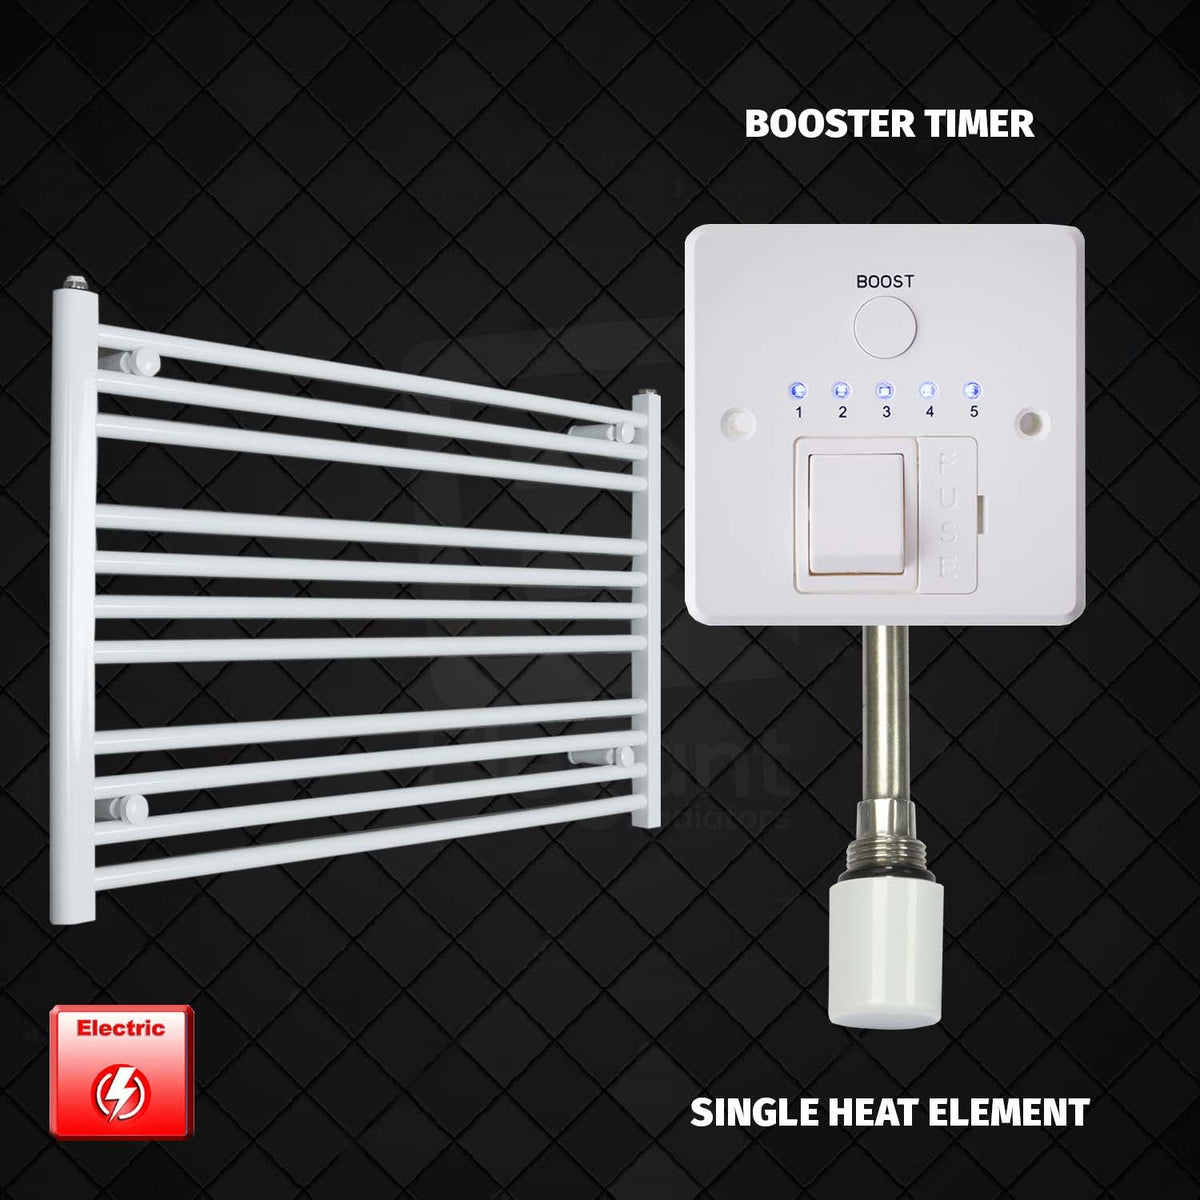 600 x 1200 Pre-Filled Electric Heated Towel Radiator White HTR Single heat element Booster timer